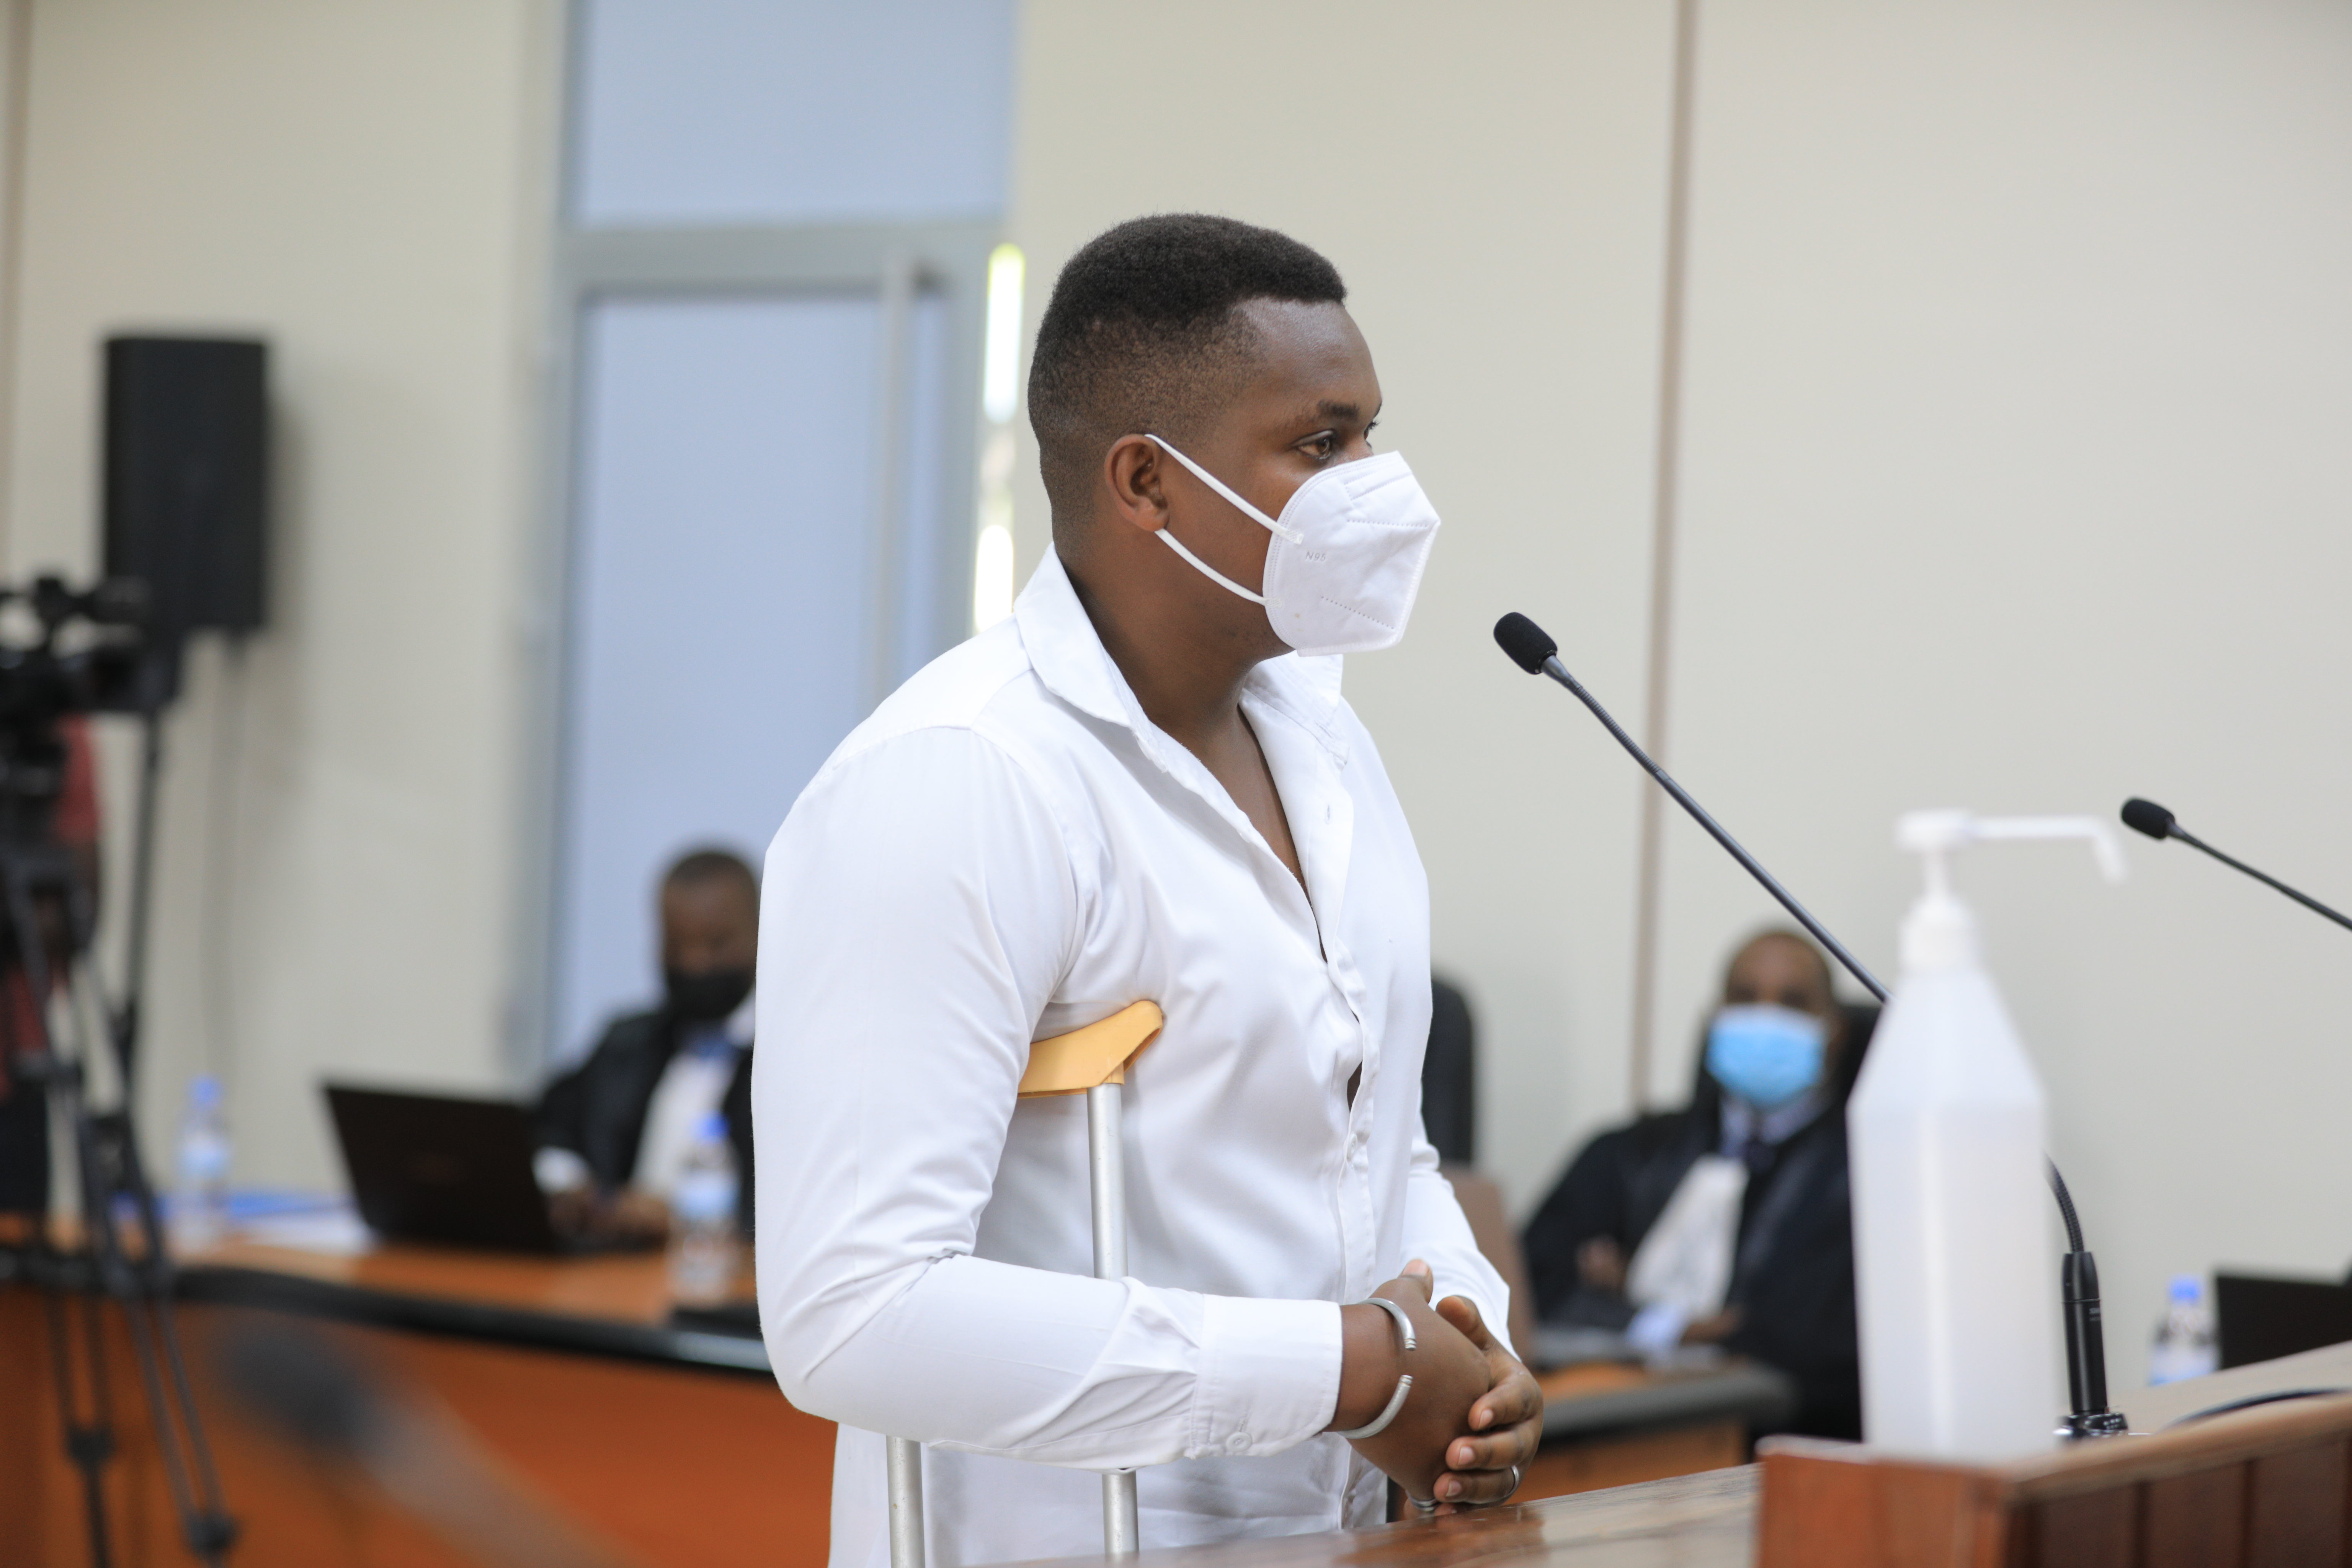 Vianney Bwimba,a victim of Nyungwe  witnessing to the court on June 16, 2021. Ninety-five people who were affected by the 2018 and 2019 terror attacks by the MRCD-FLN outfit have, in written form, narrated the ordeal. File